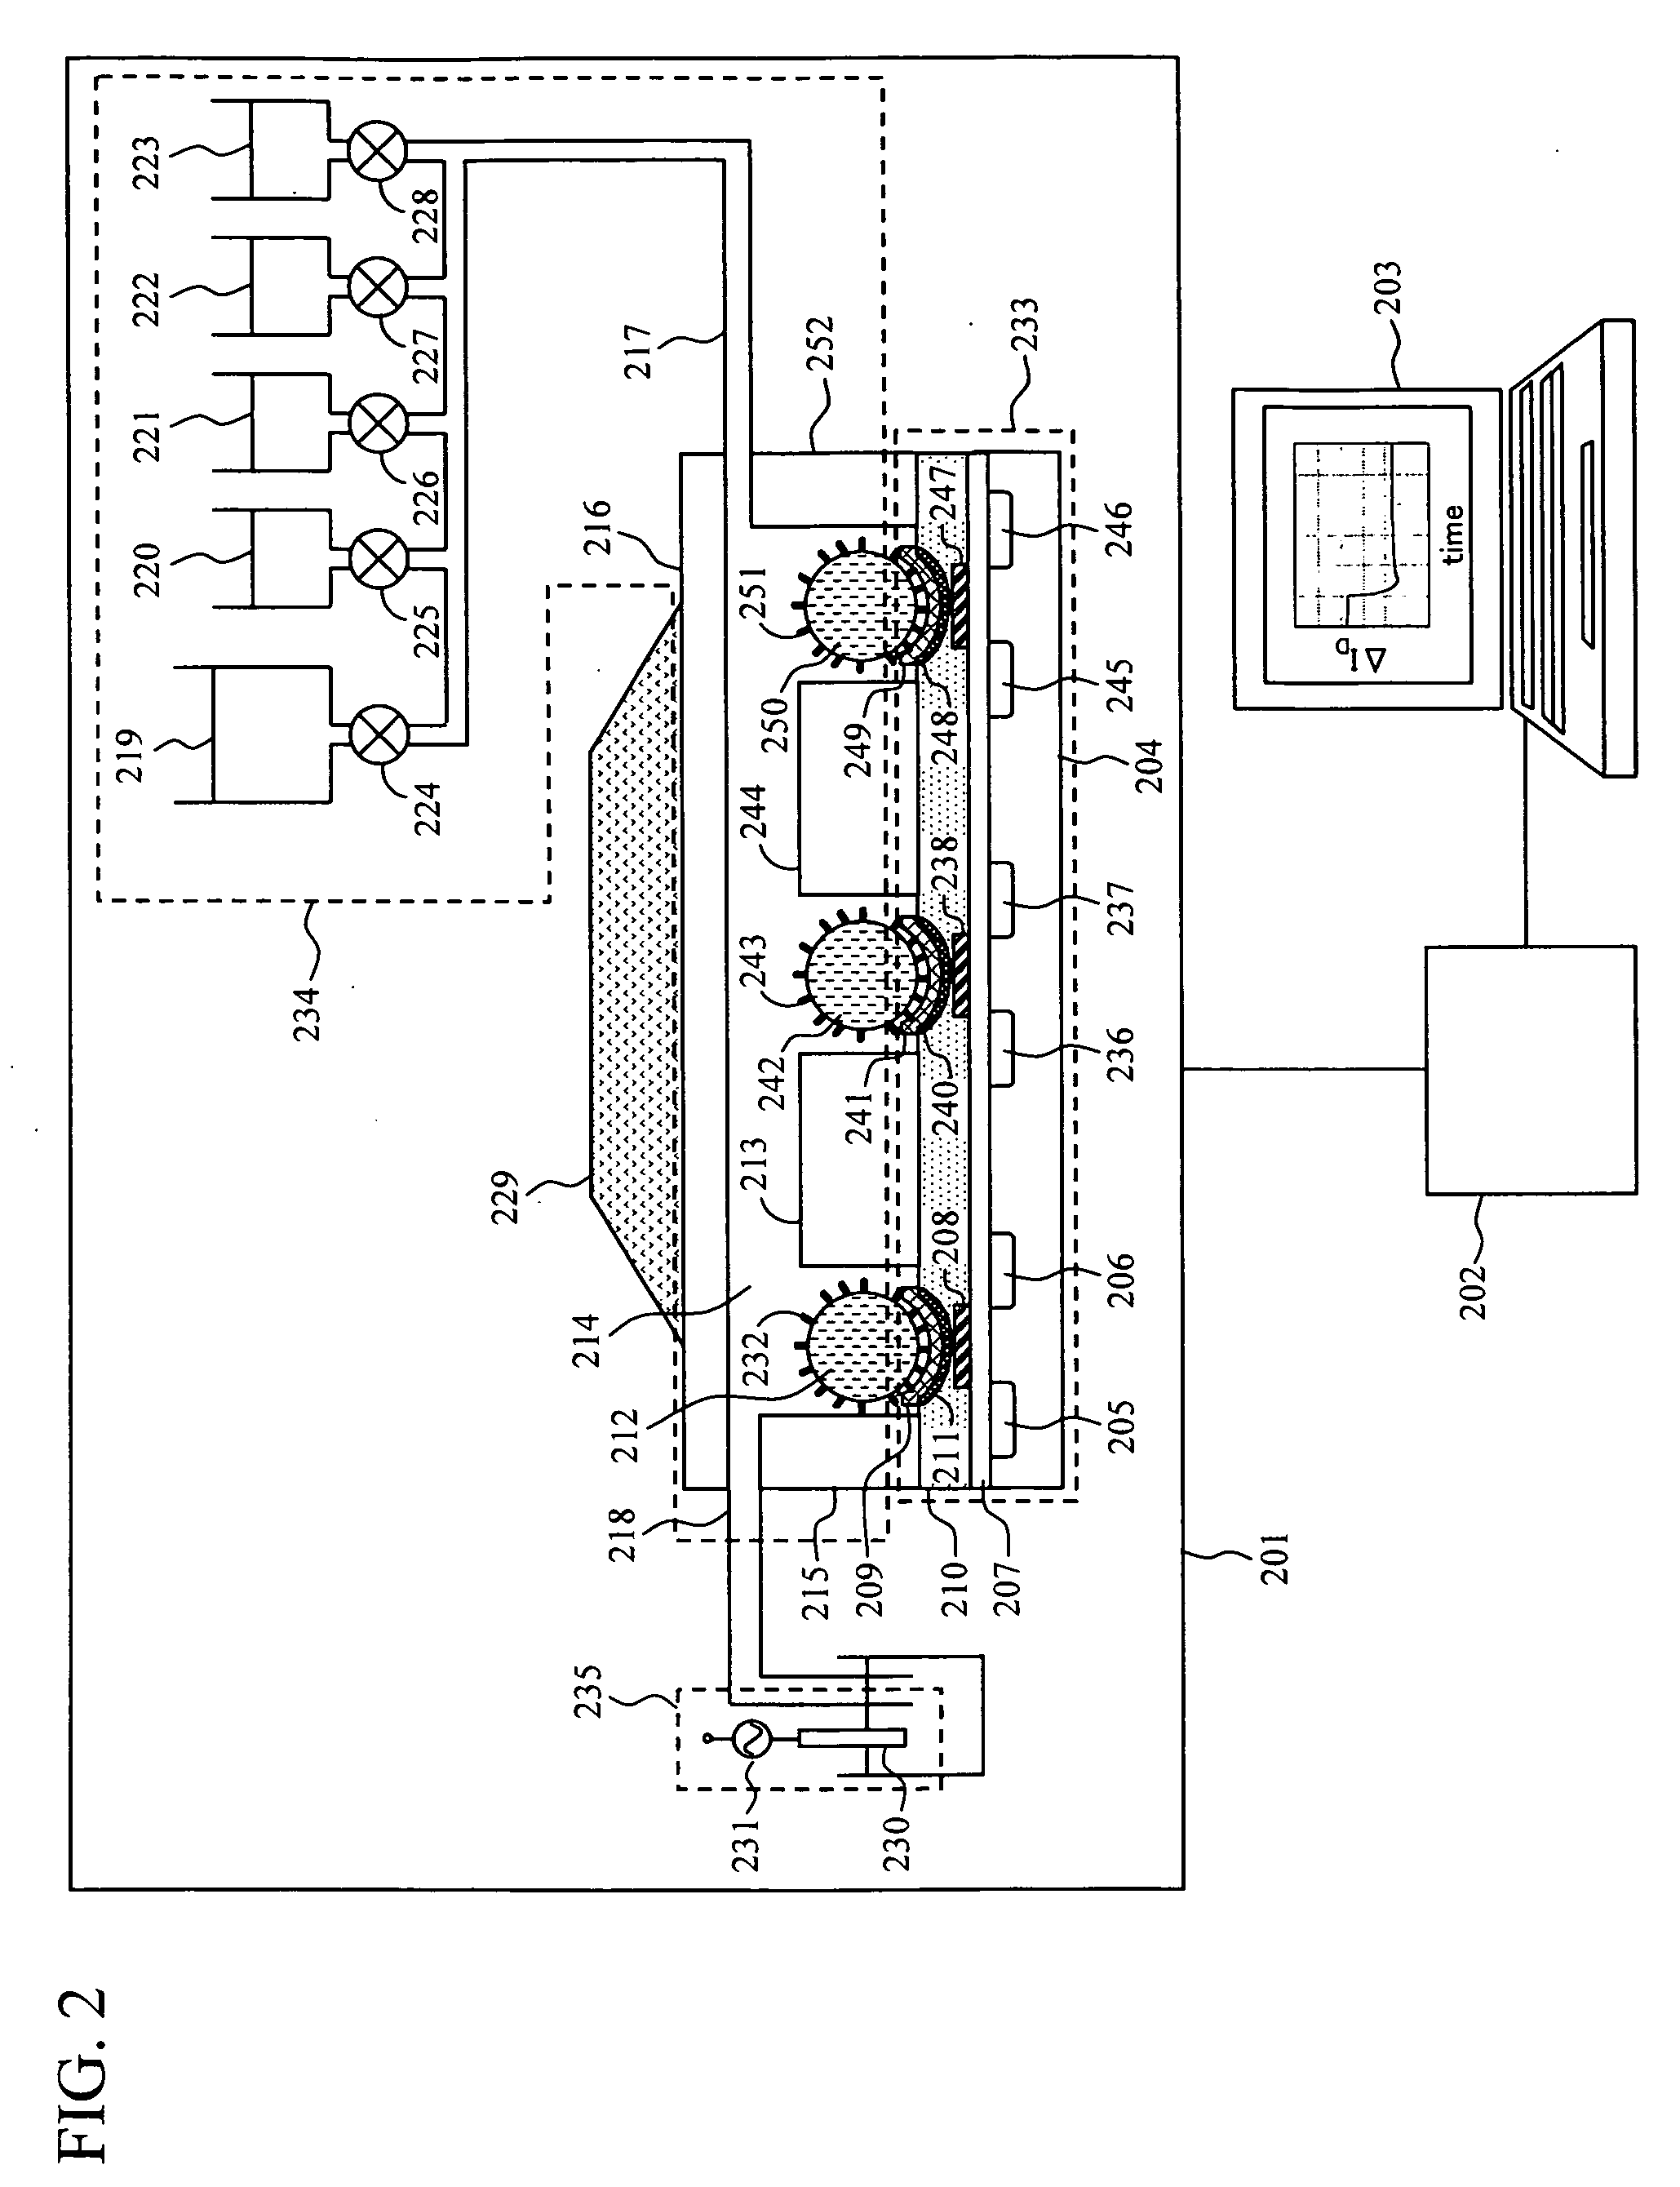 DNA measuring system and method